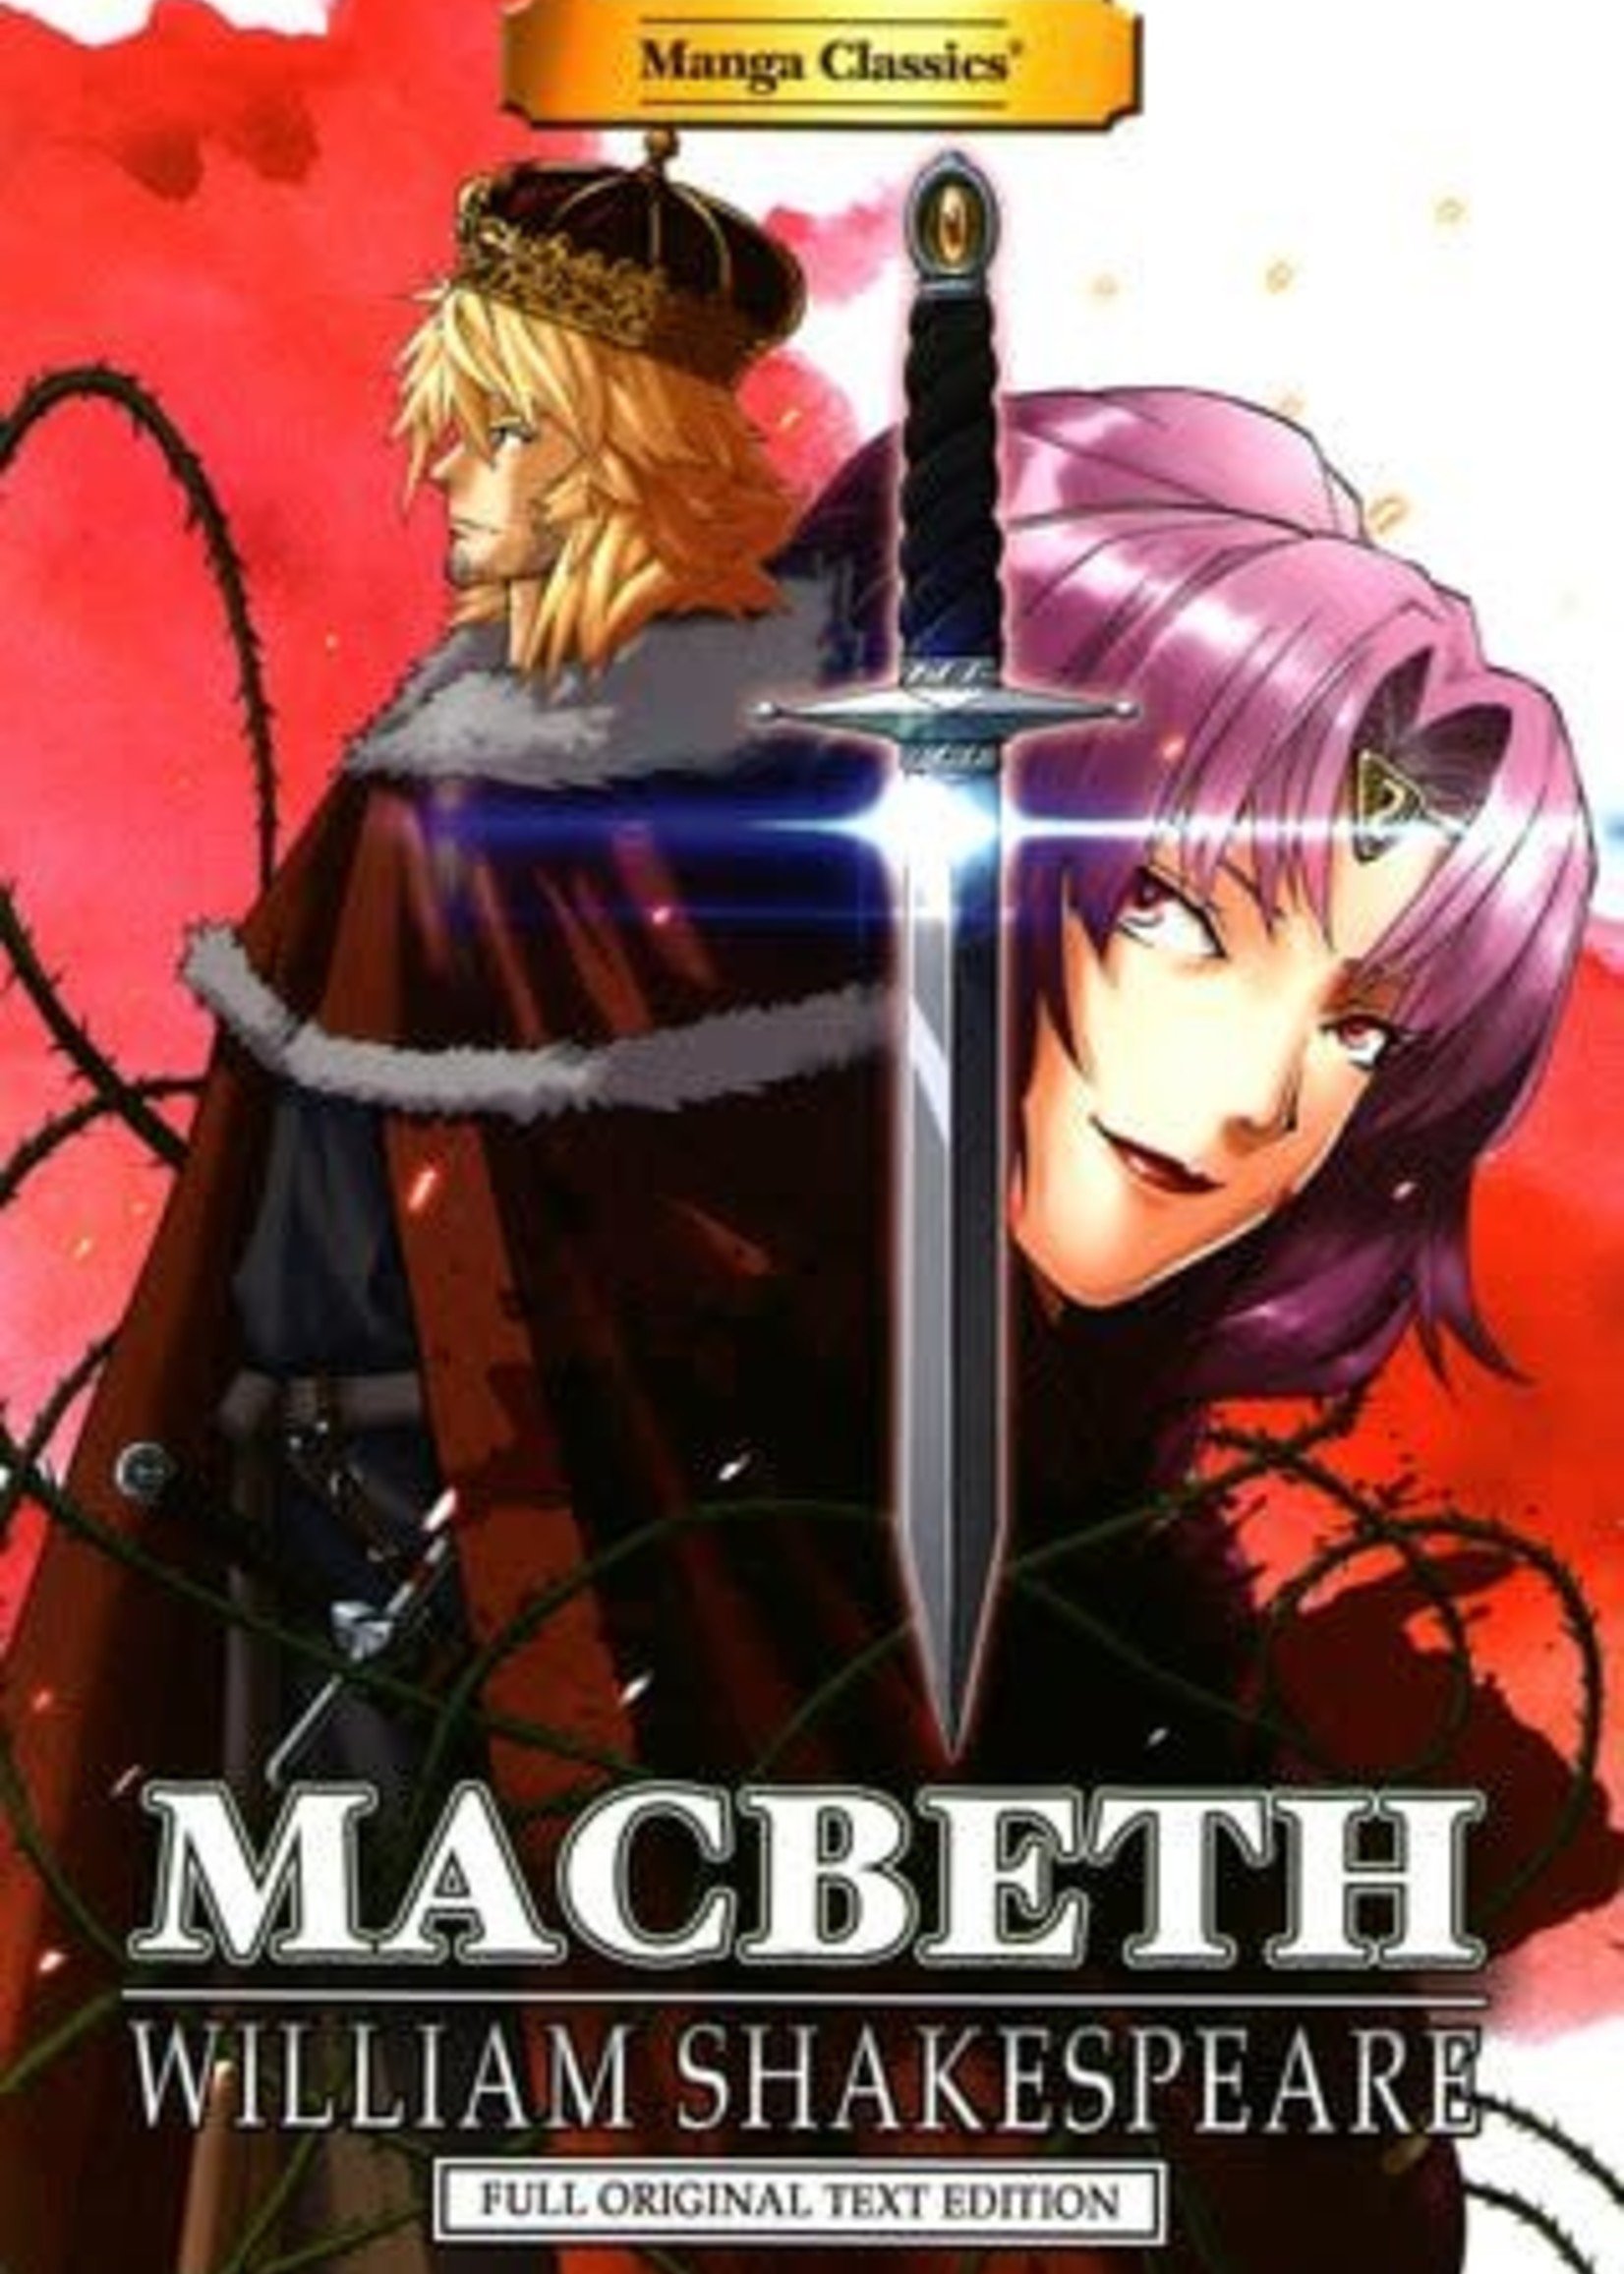 Macbeth (Manga Classics) by Stacy King, Crystal S. Chan, Julien Choy, Wing-Yin Leung, W.T. Francis, William Shakespeare